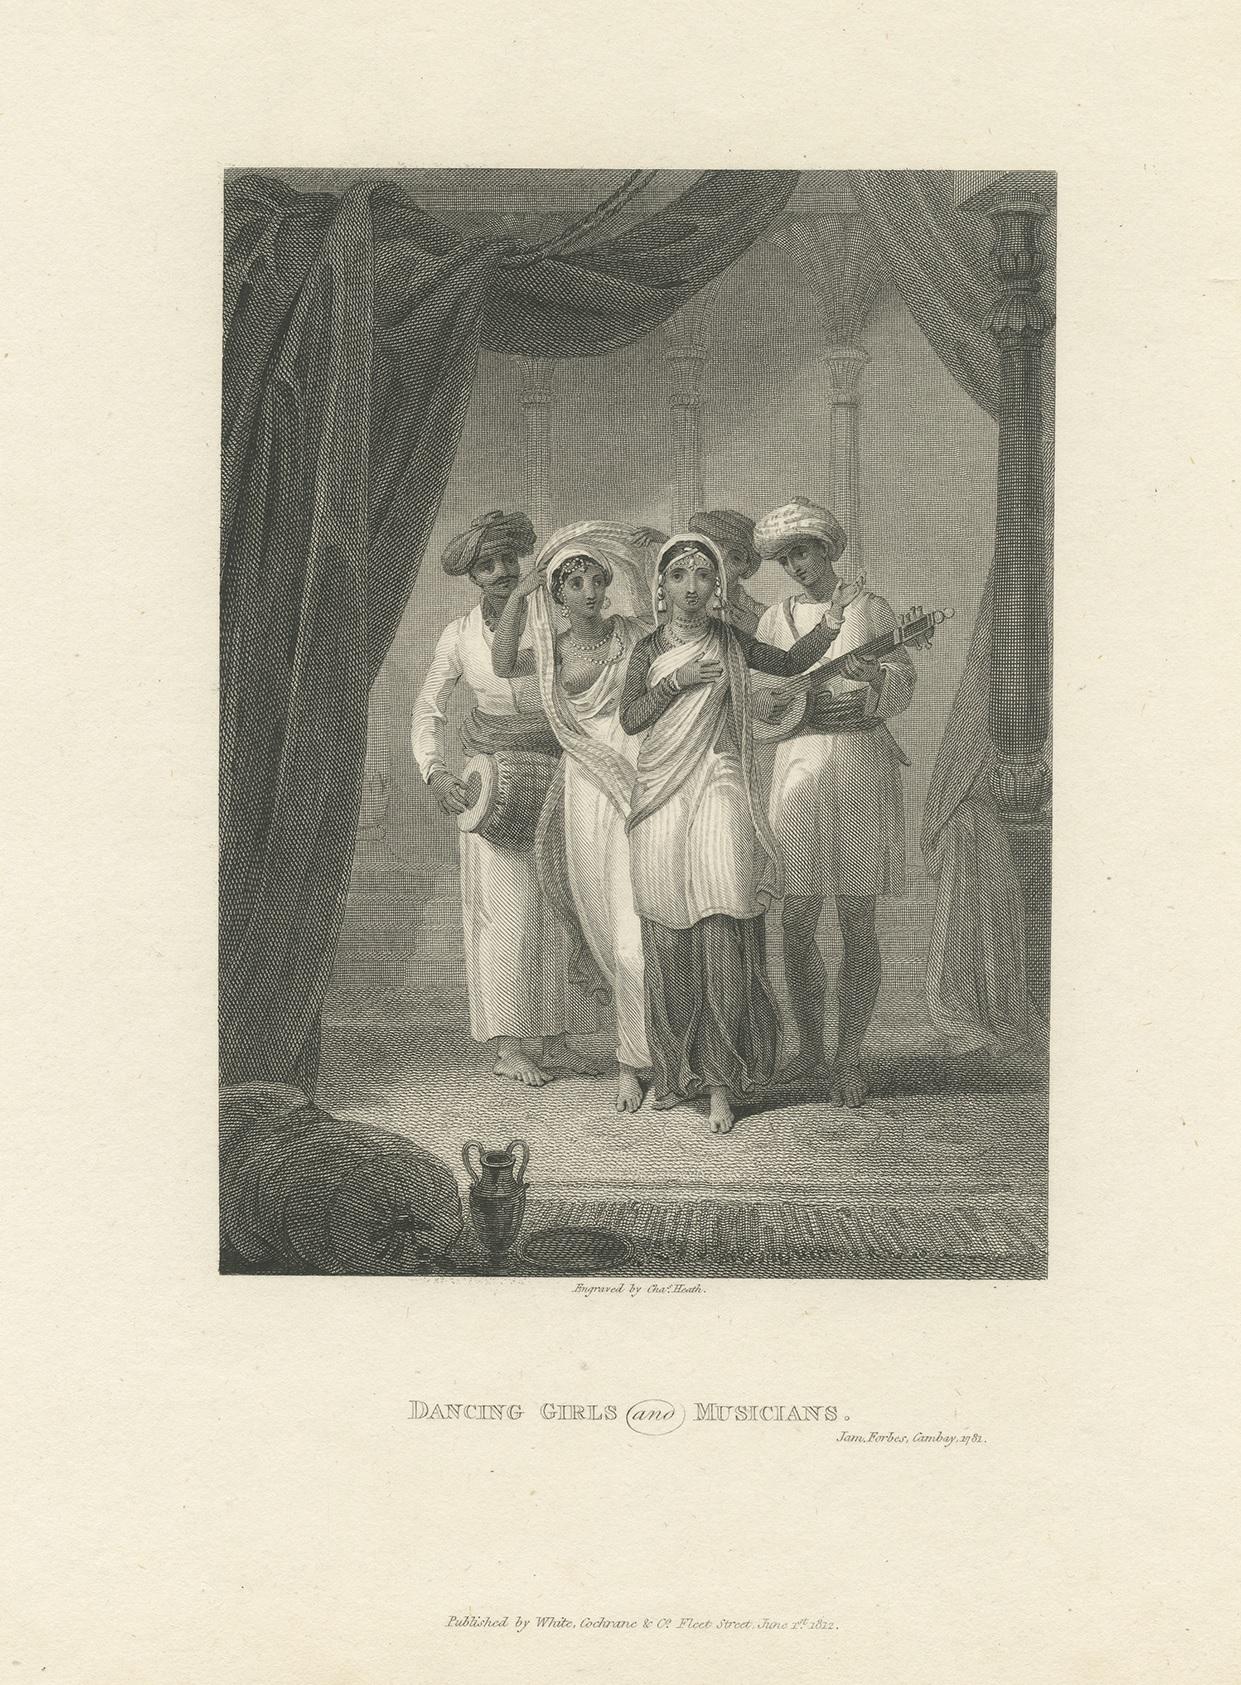 Antique print titled 'Dancing girls and musicians'. This print originates from an edition of 'Oriental Memoirs', a work in the form of a series of letters richly illustrated, describing various aspects of nature, people and buildings he observed